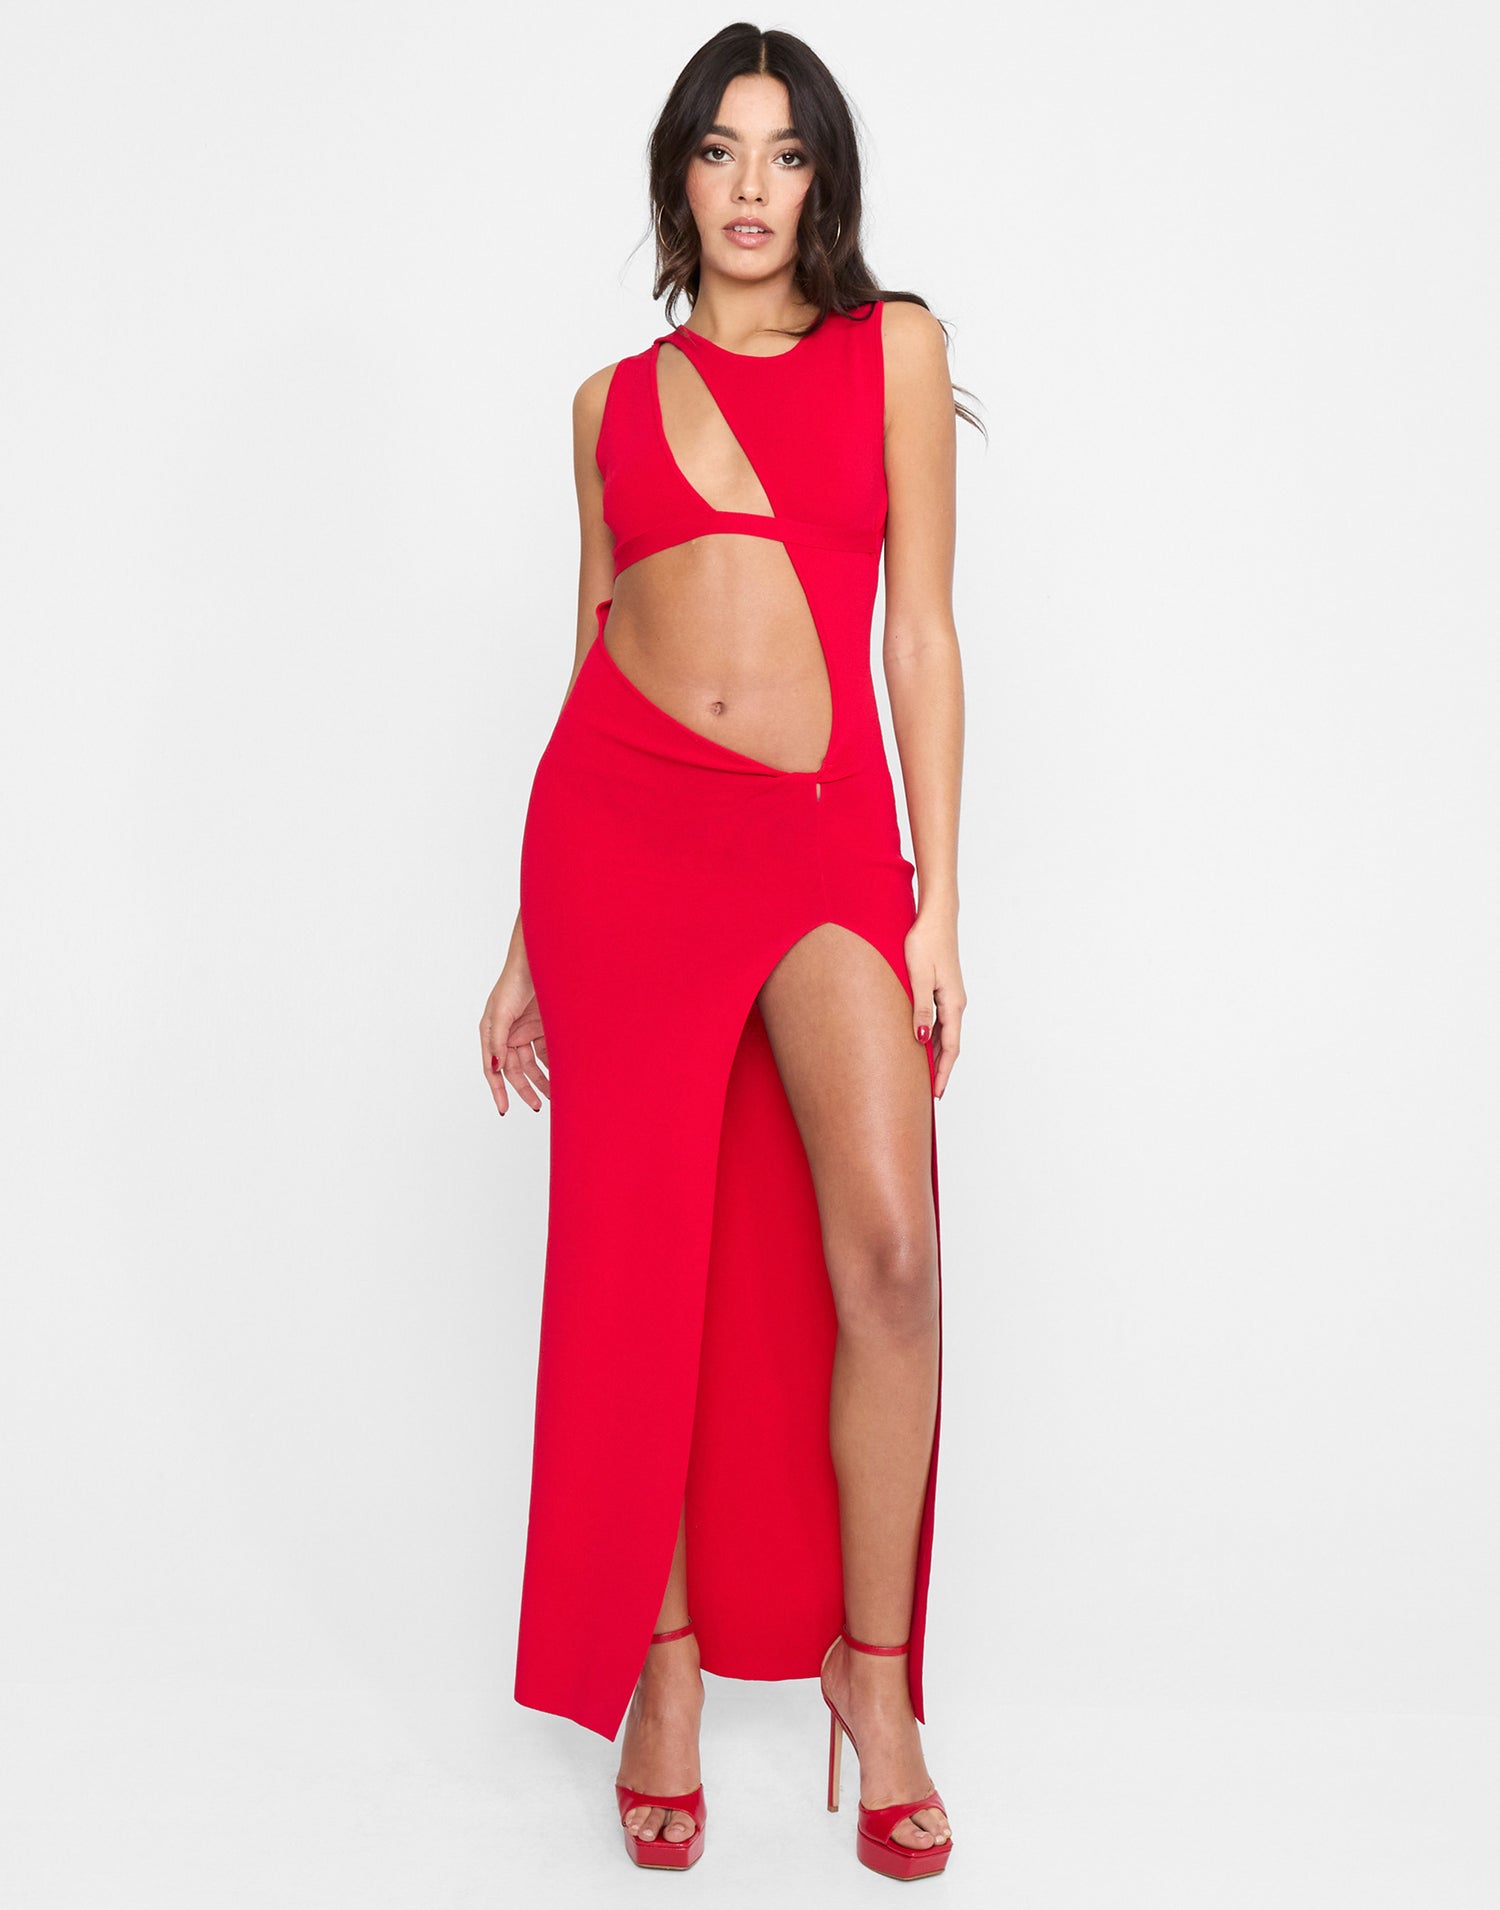 This Is It Apparel Maxi Dress by Summer Haus in Red with Sexy Cutouts & High Leg Slit - Alternate Front View